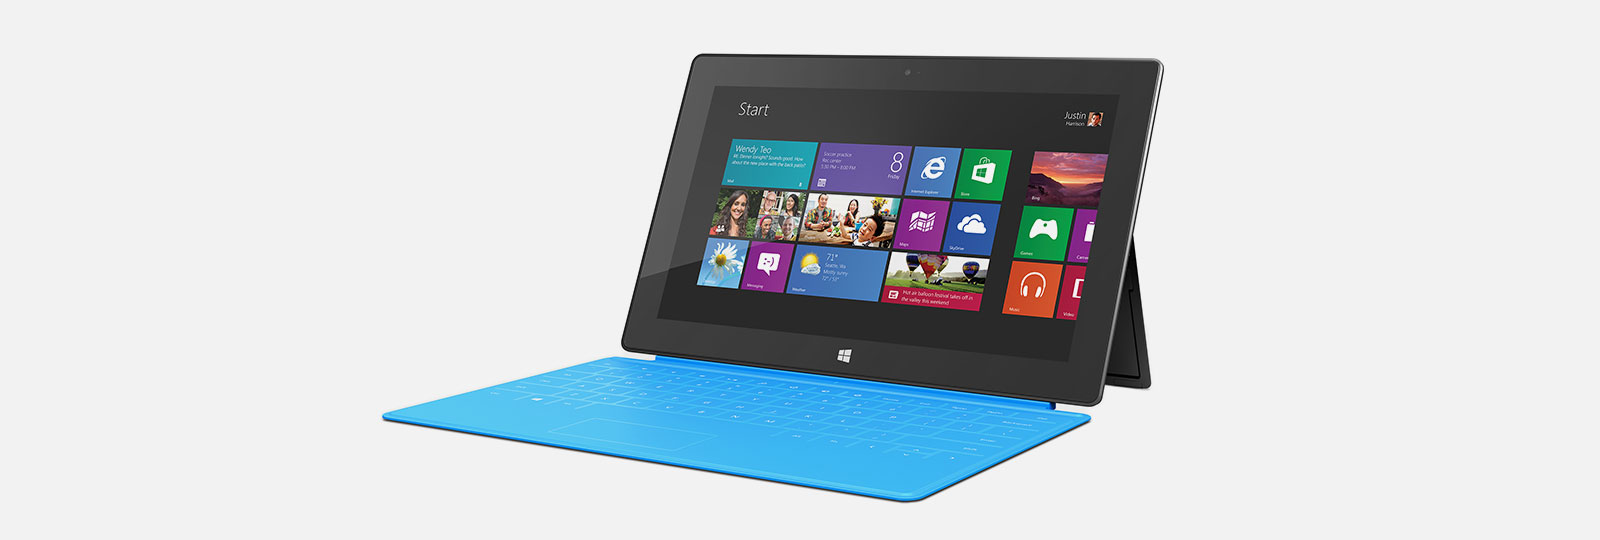 Learn more about Surface RT.